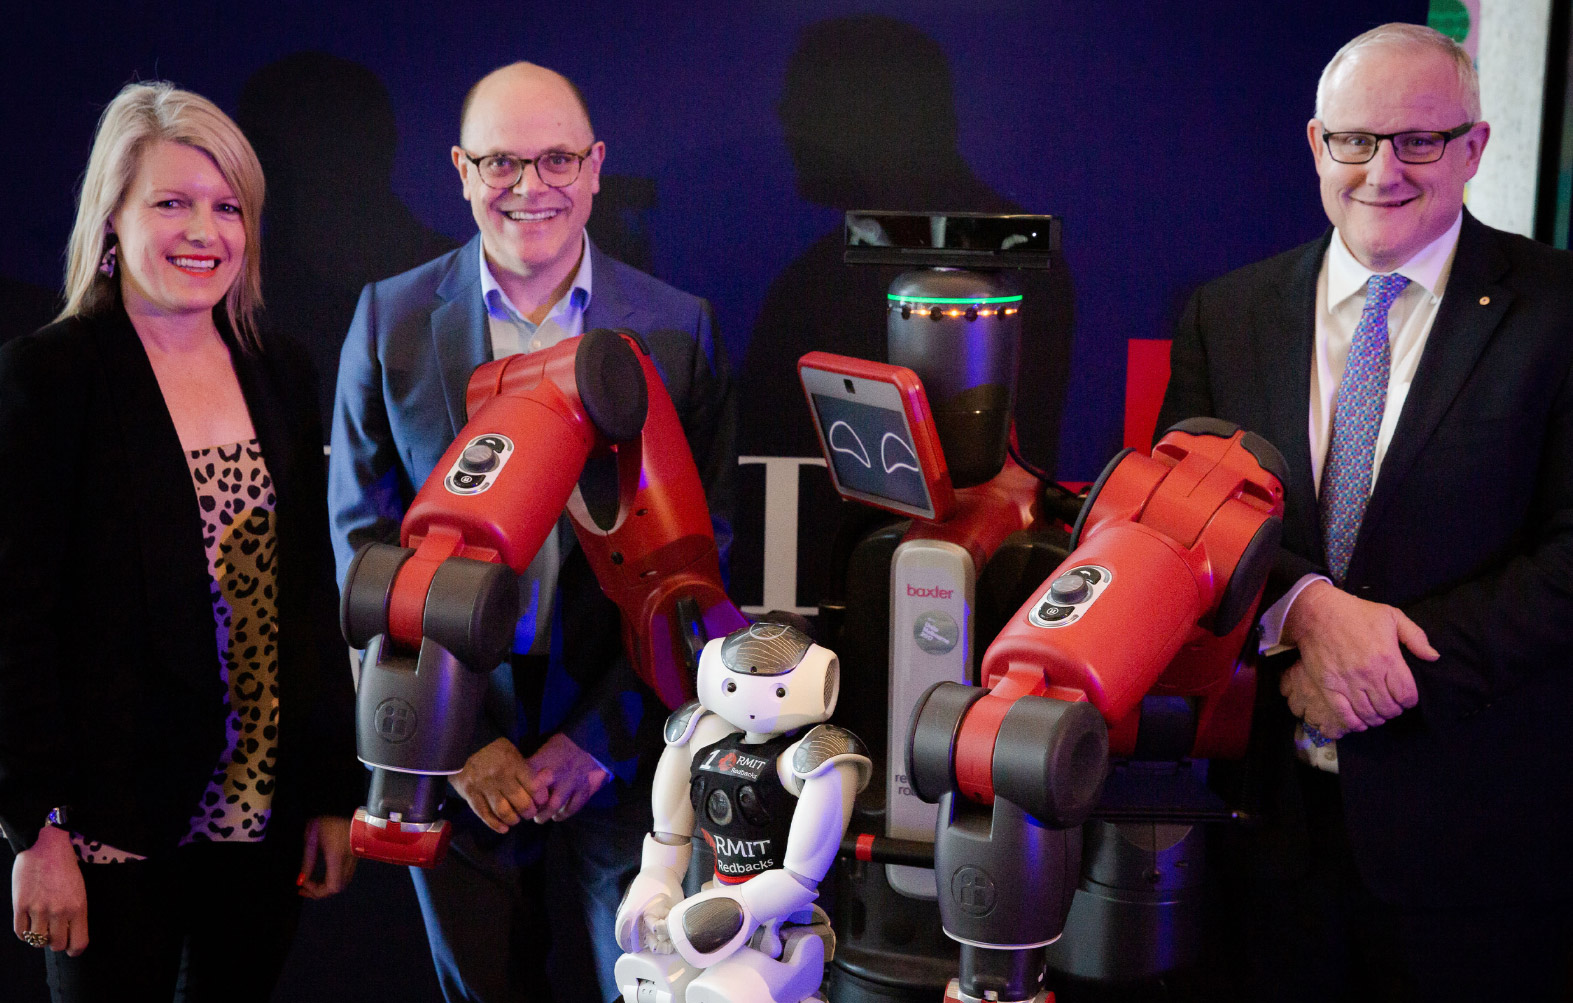 People standing with an RMIT robot